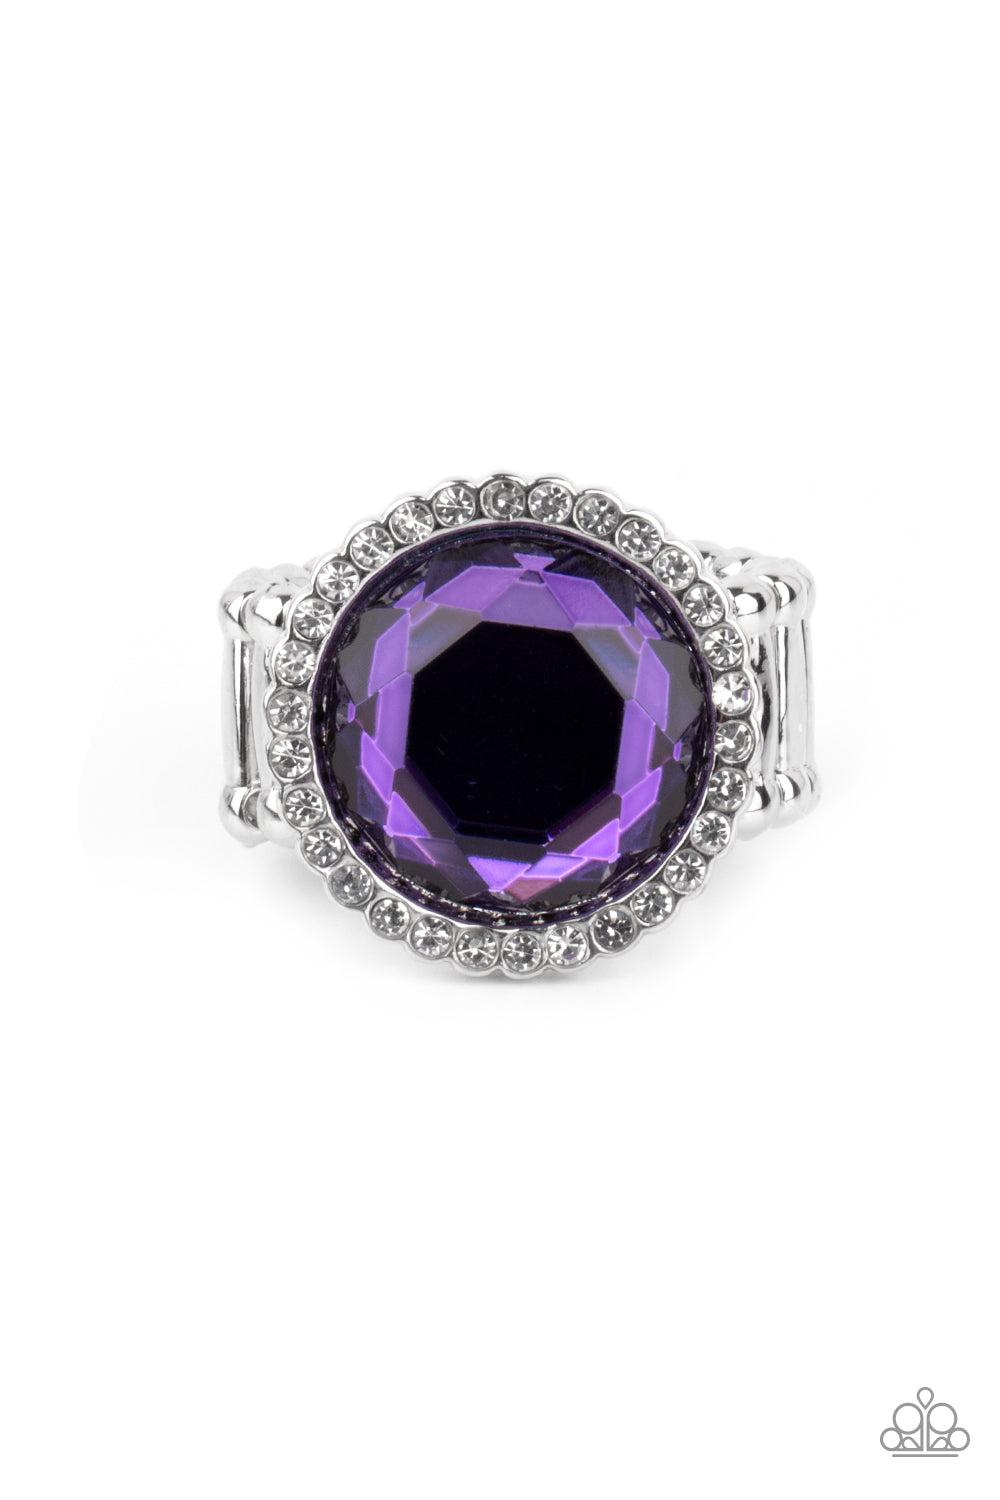 Crown Culture Purple Ring - Paparazzi Accessories.  A round purple gem is bordered in a glassy ring of dainty white rhinestones, creating a sparkly centerpiece atop the finger. Features a stretchy band for a flexible fit.  ﻿All Paparazzi Accessories are lead free and nickel free!  Sold as one individual ring.